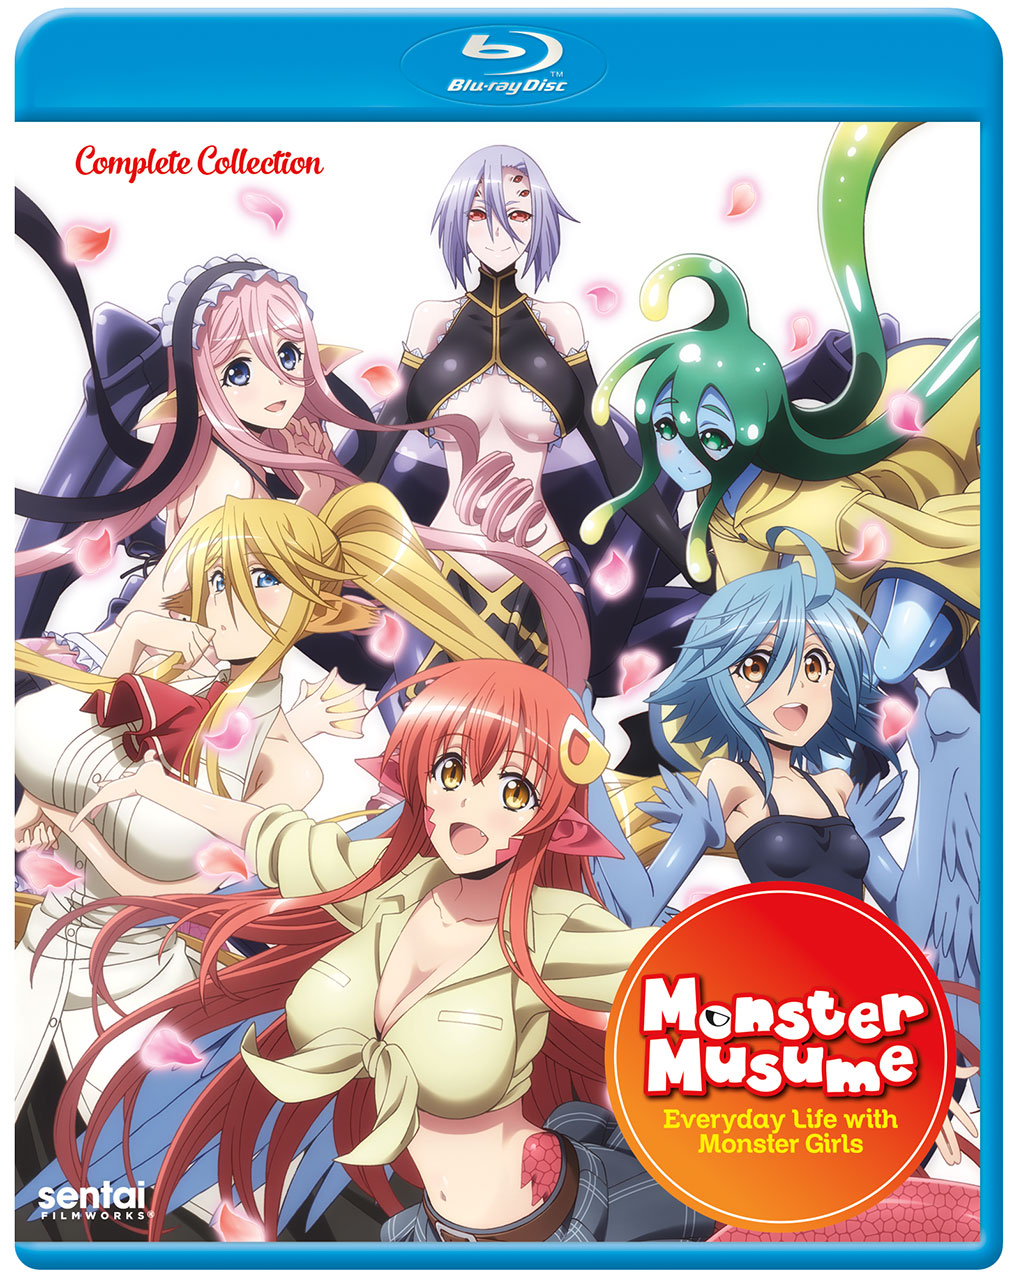 Monster Musume Everyday Life with Monster Girls Blu-ray | Crunchyroll Store